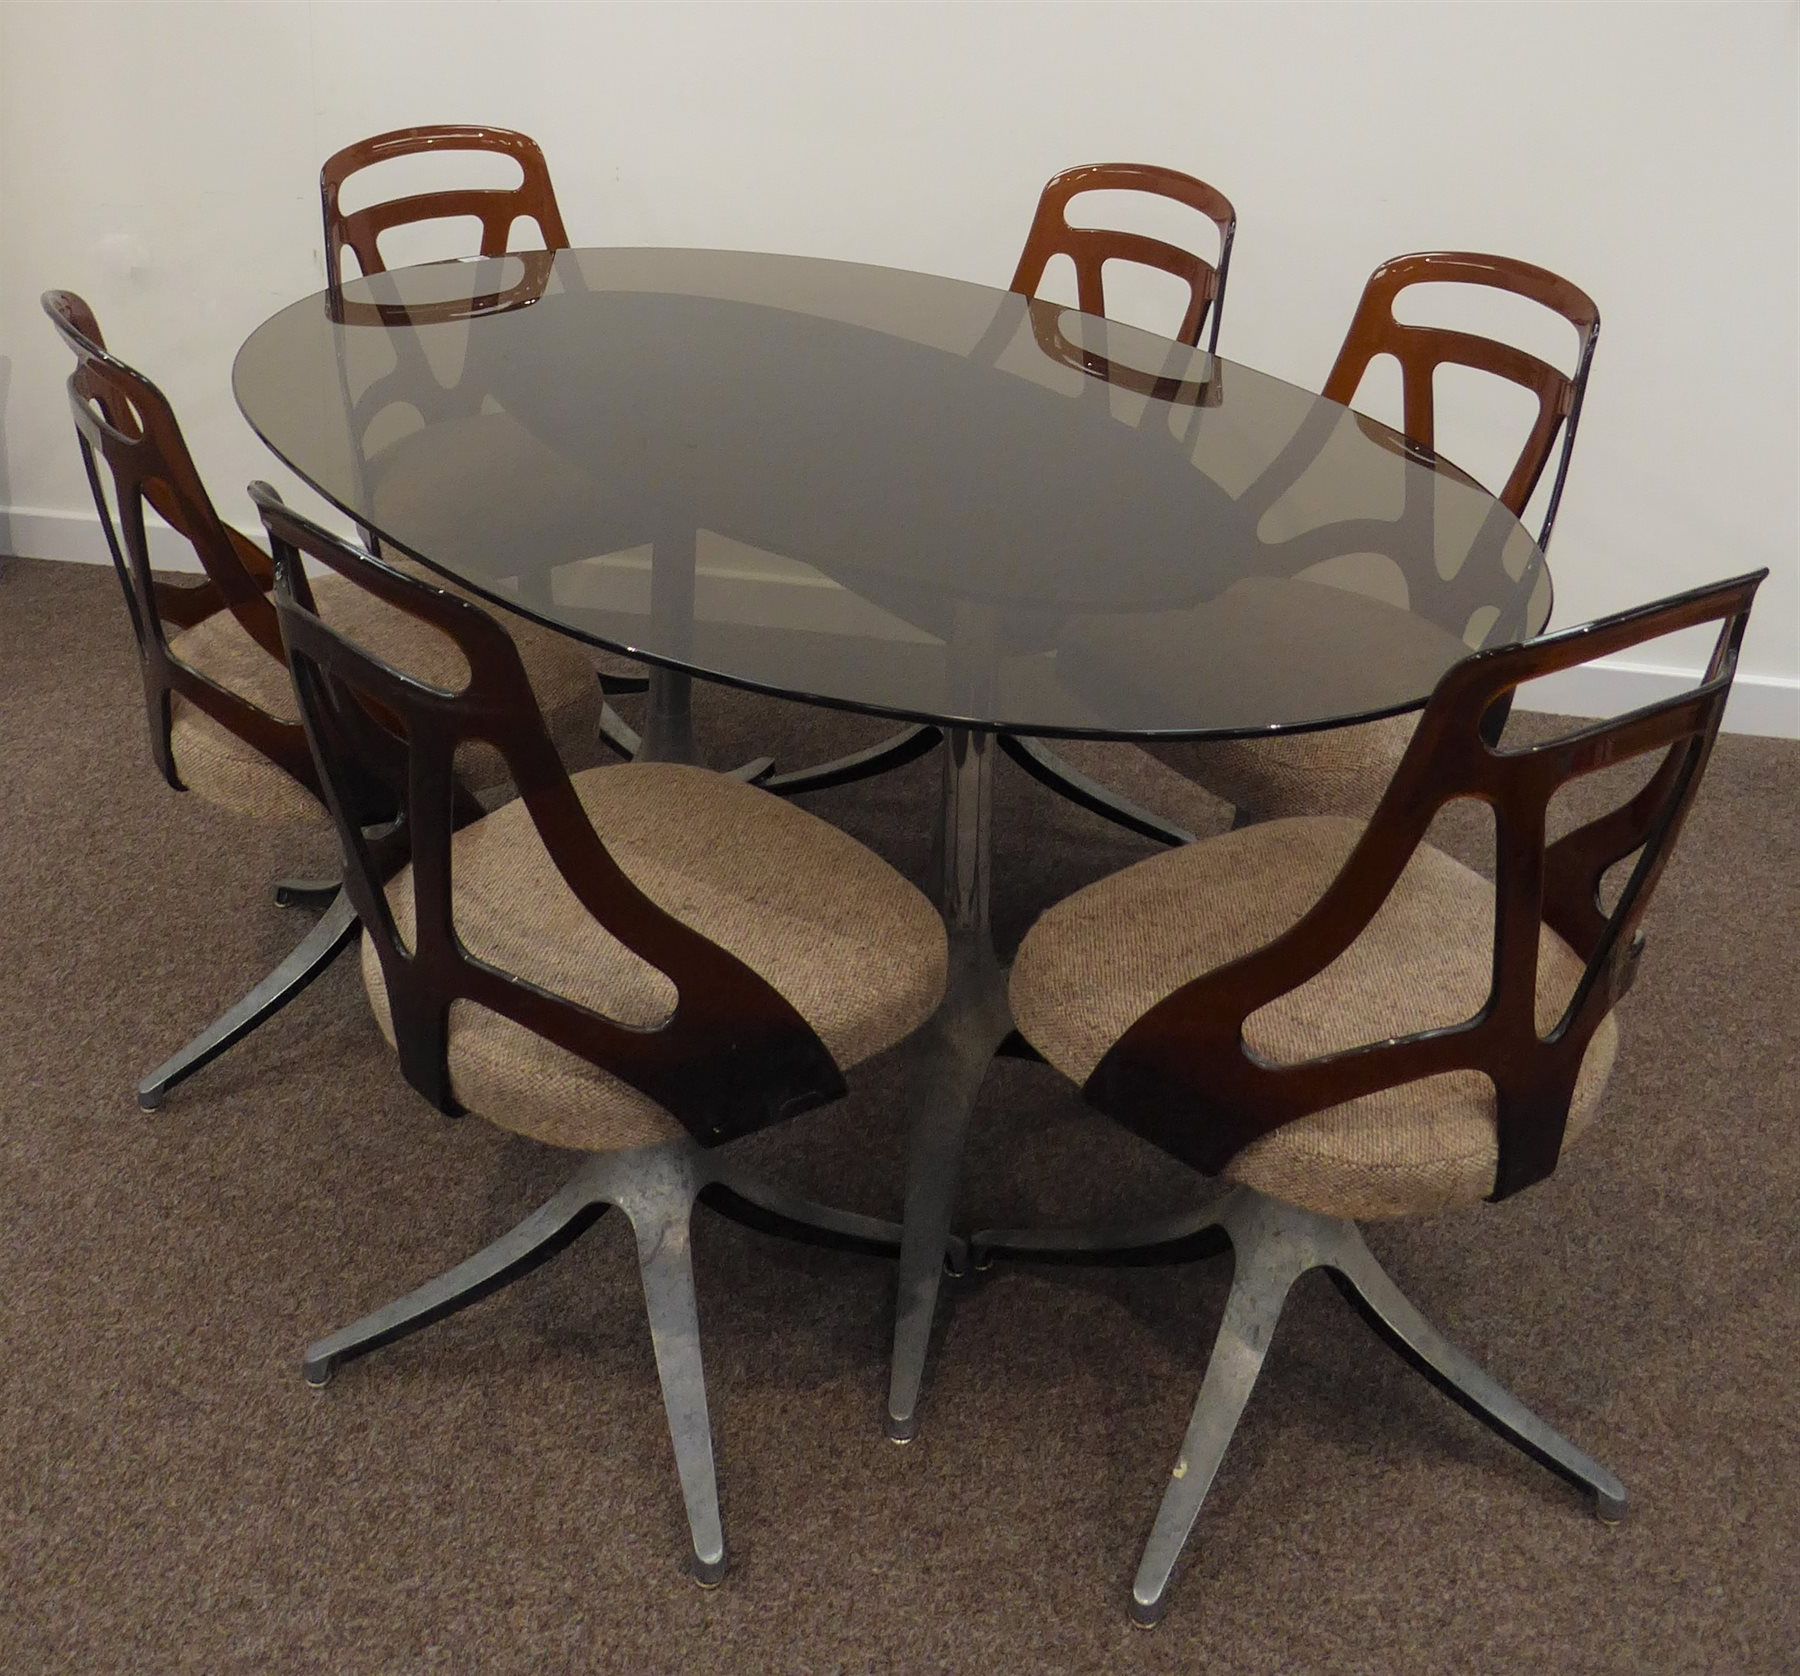 Most Recent 1970s Dining Table, Oval Smoked Glass Top On Twin Chromed Throughout Smoked Oval Glasstop Dining Tables (View 26 of 30)